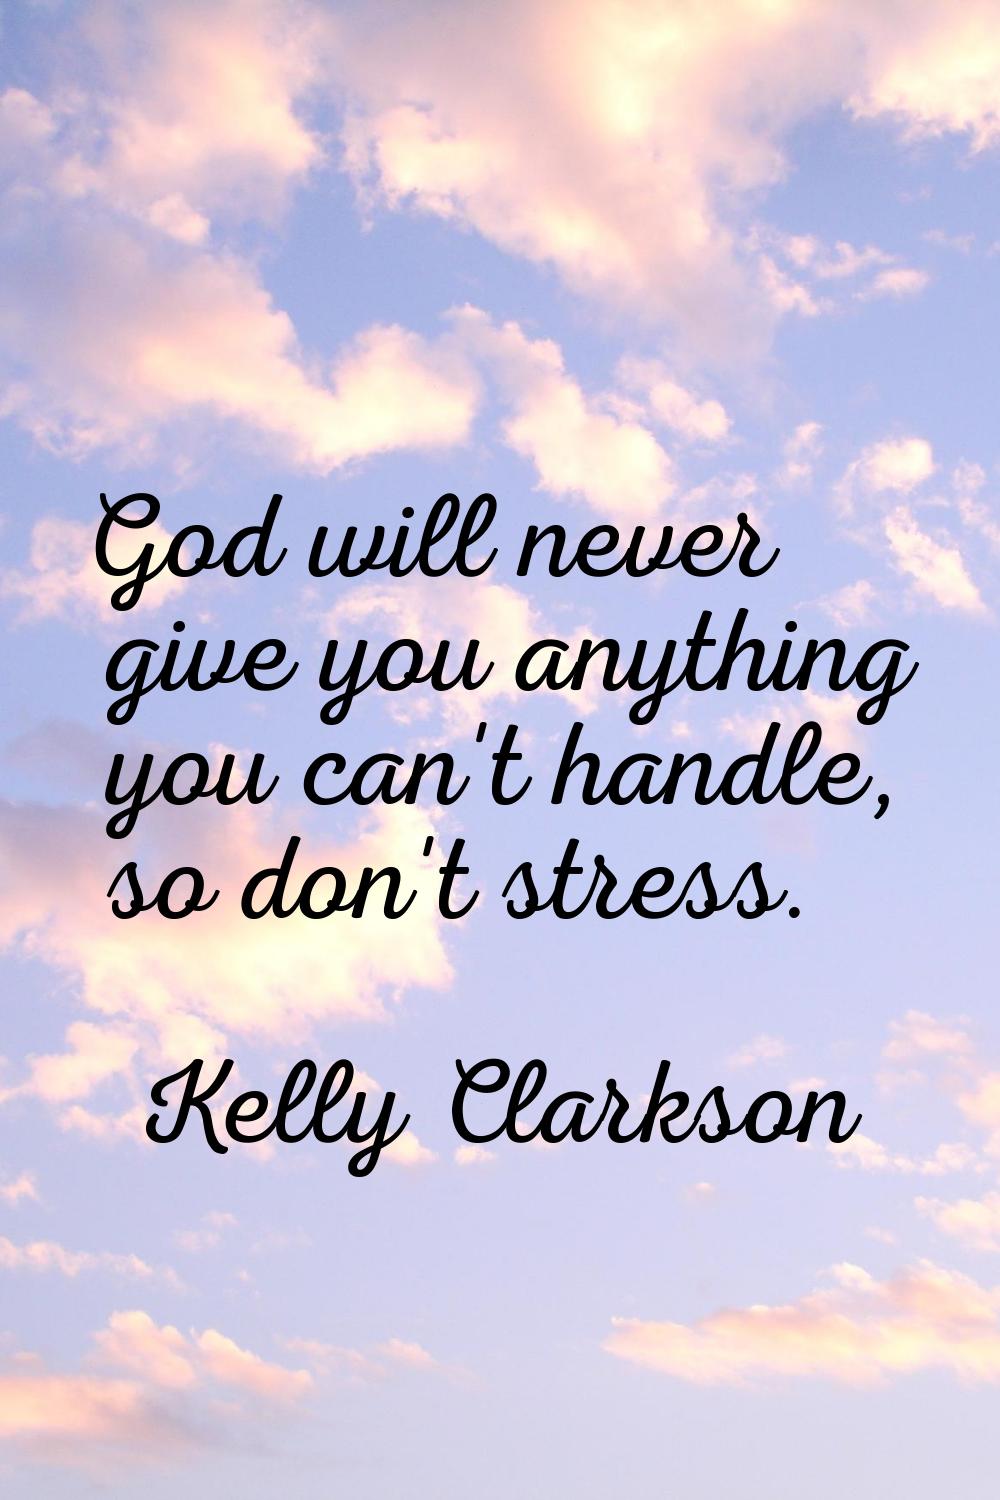 God will never give you anything you can't handle, so don't stress.